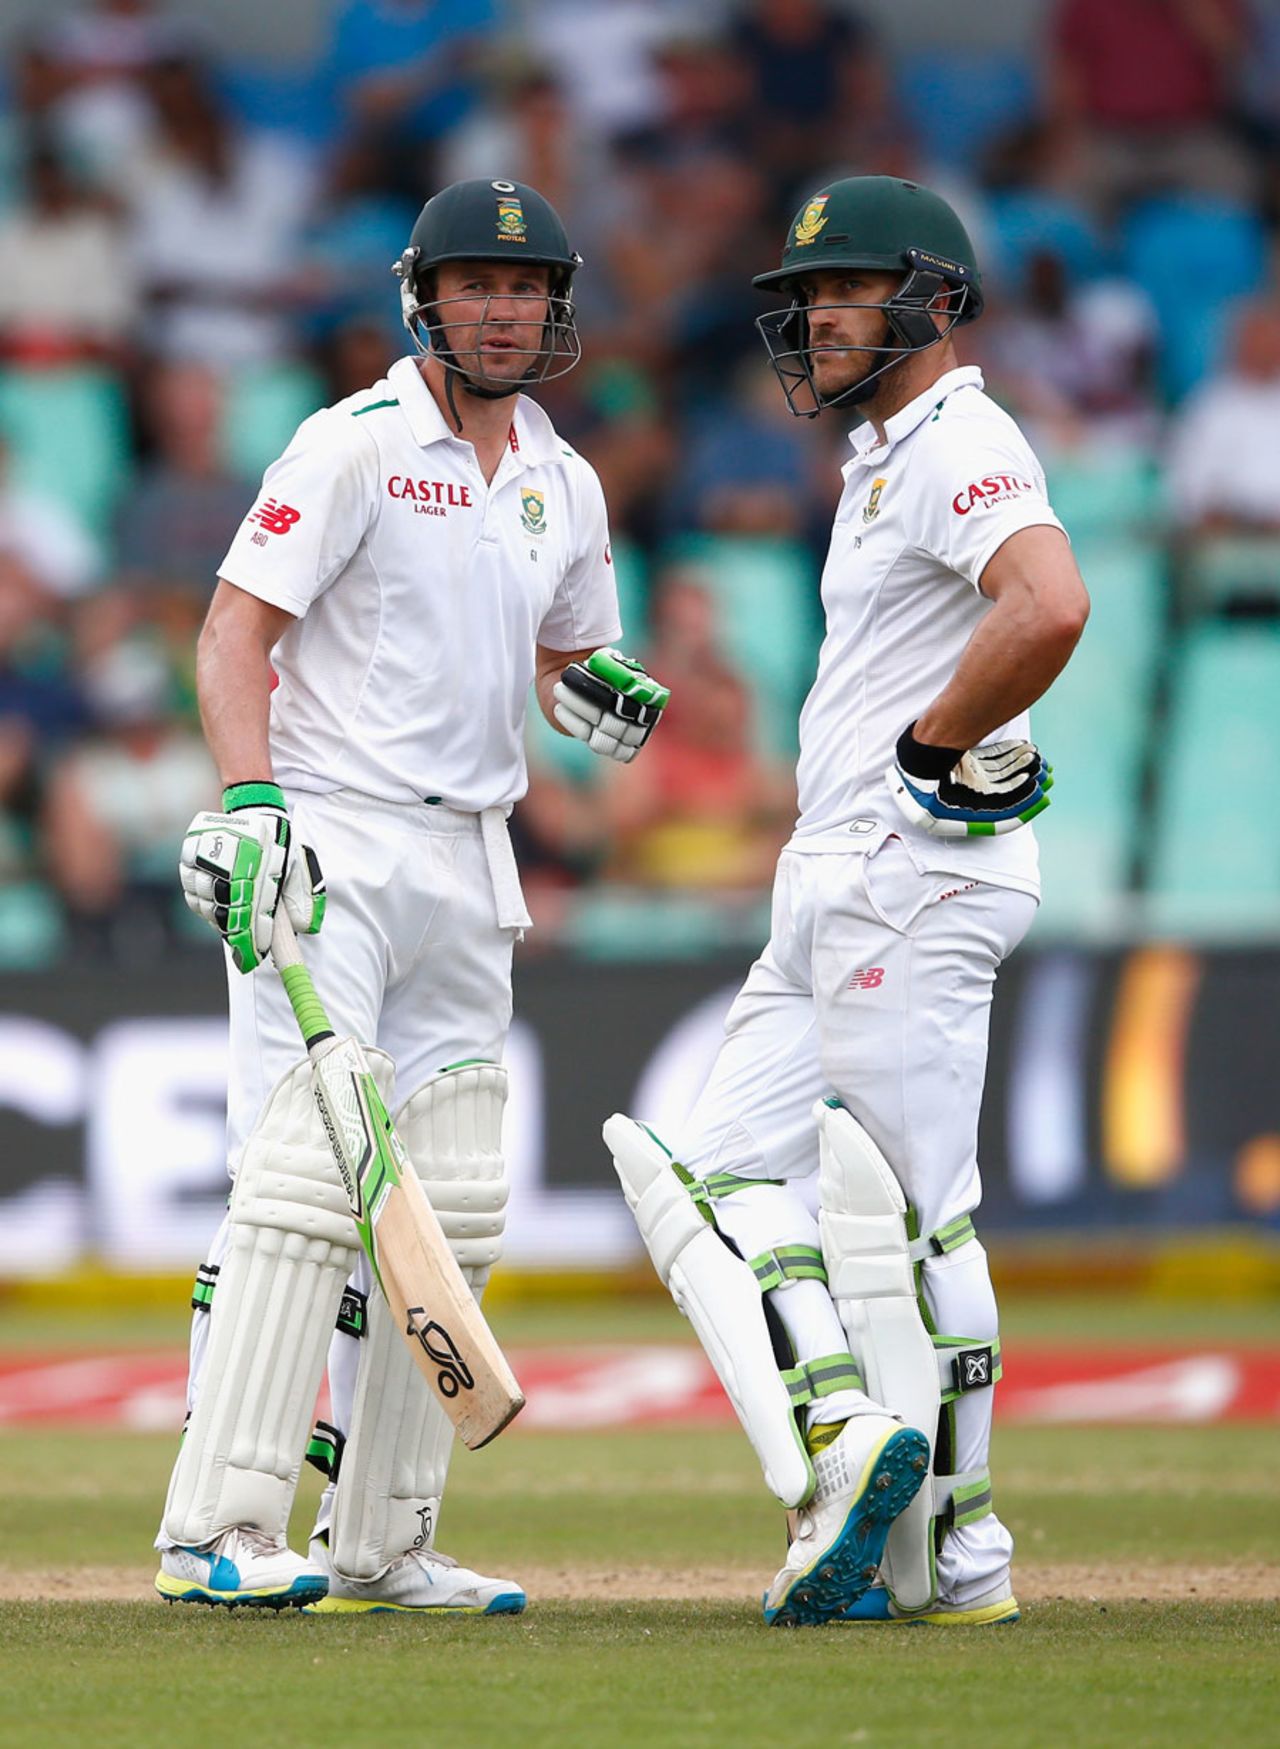 AB de Villiers and Faf du Plessis spent almost 24 overs adding 48 together, South Africa v England, 1st Test, Durban, 4th day, December 29, 2015